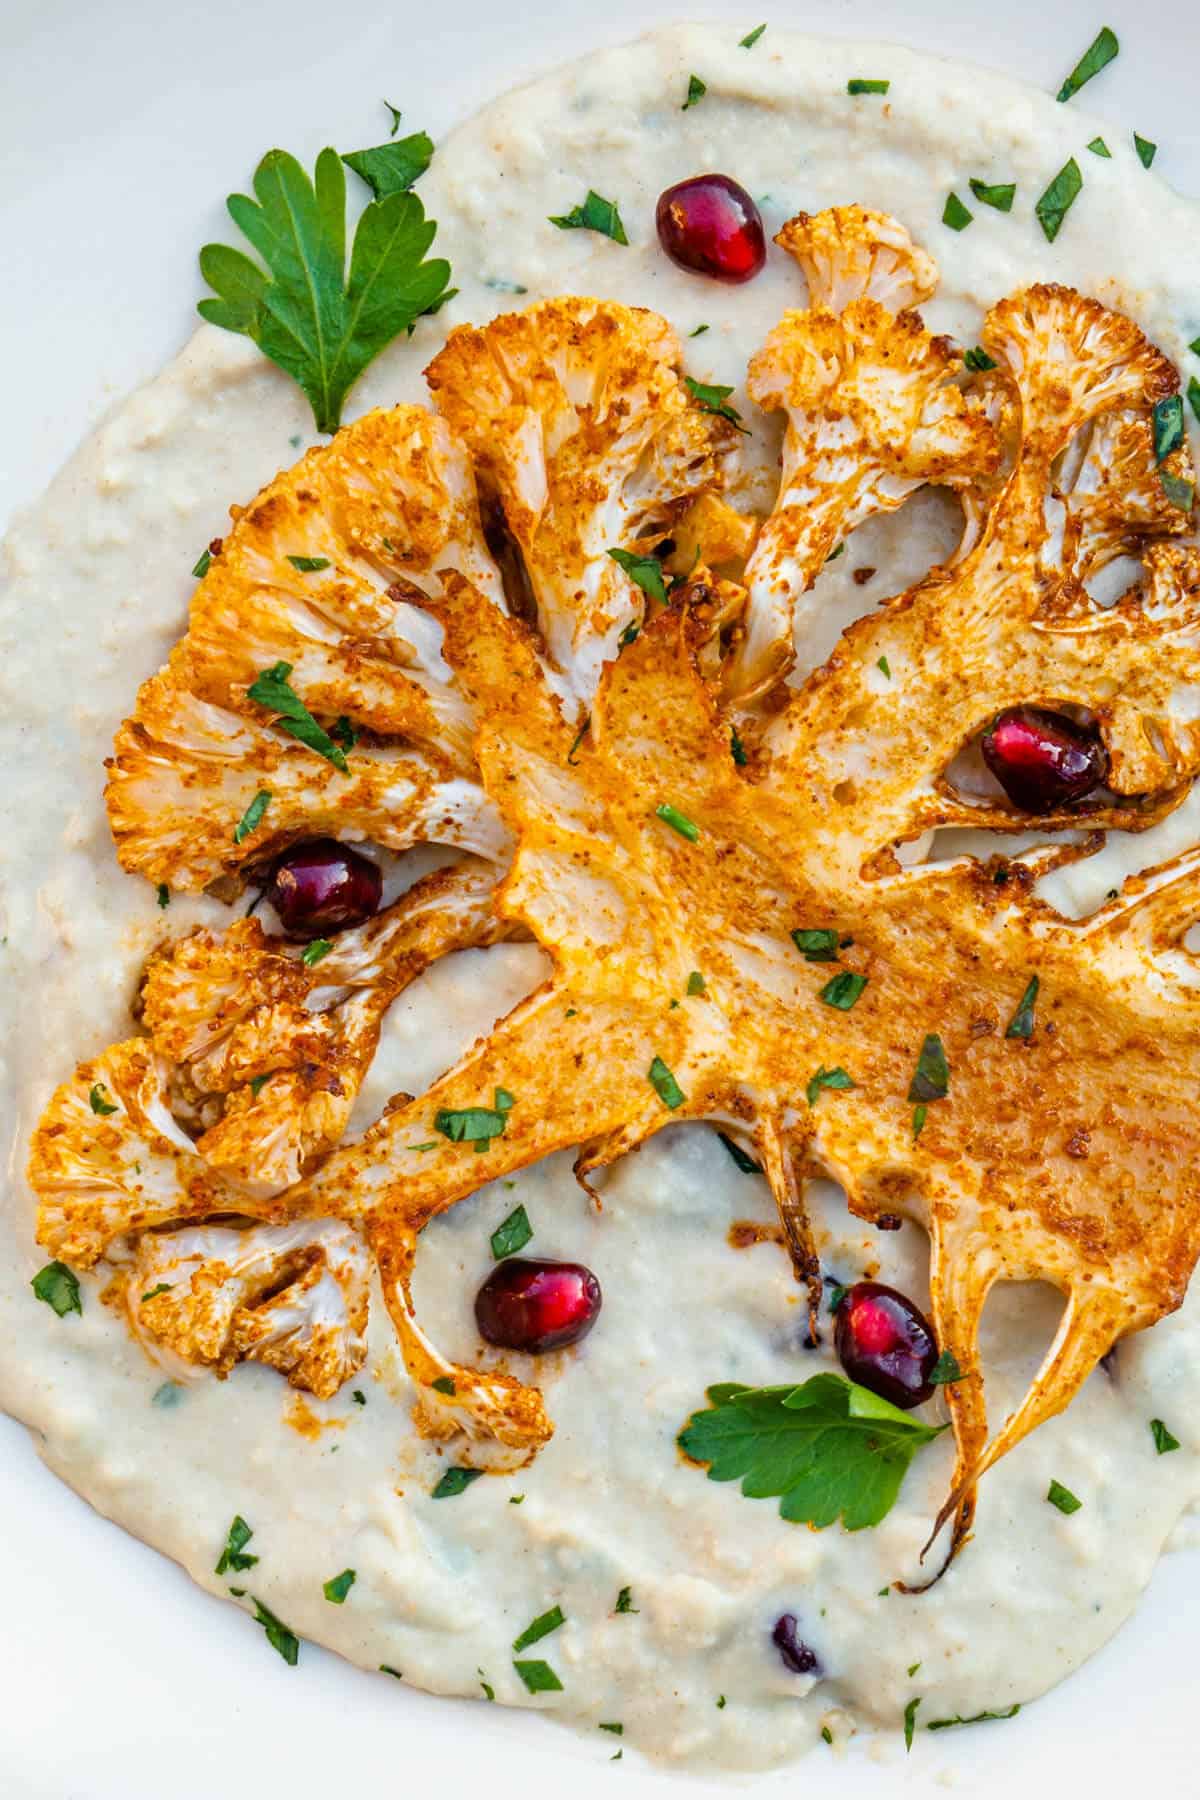 Cauliflower steak served on top of a white bean hummus with pomegranate and parsley